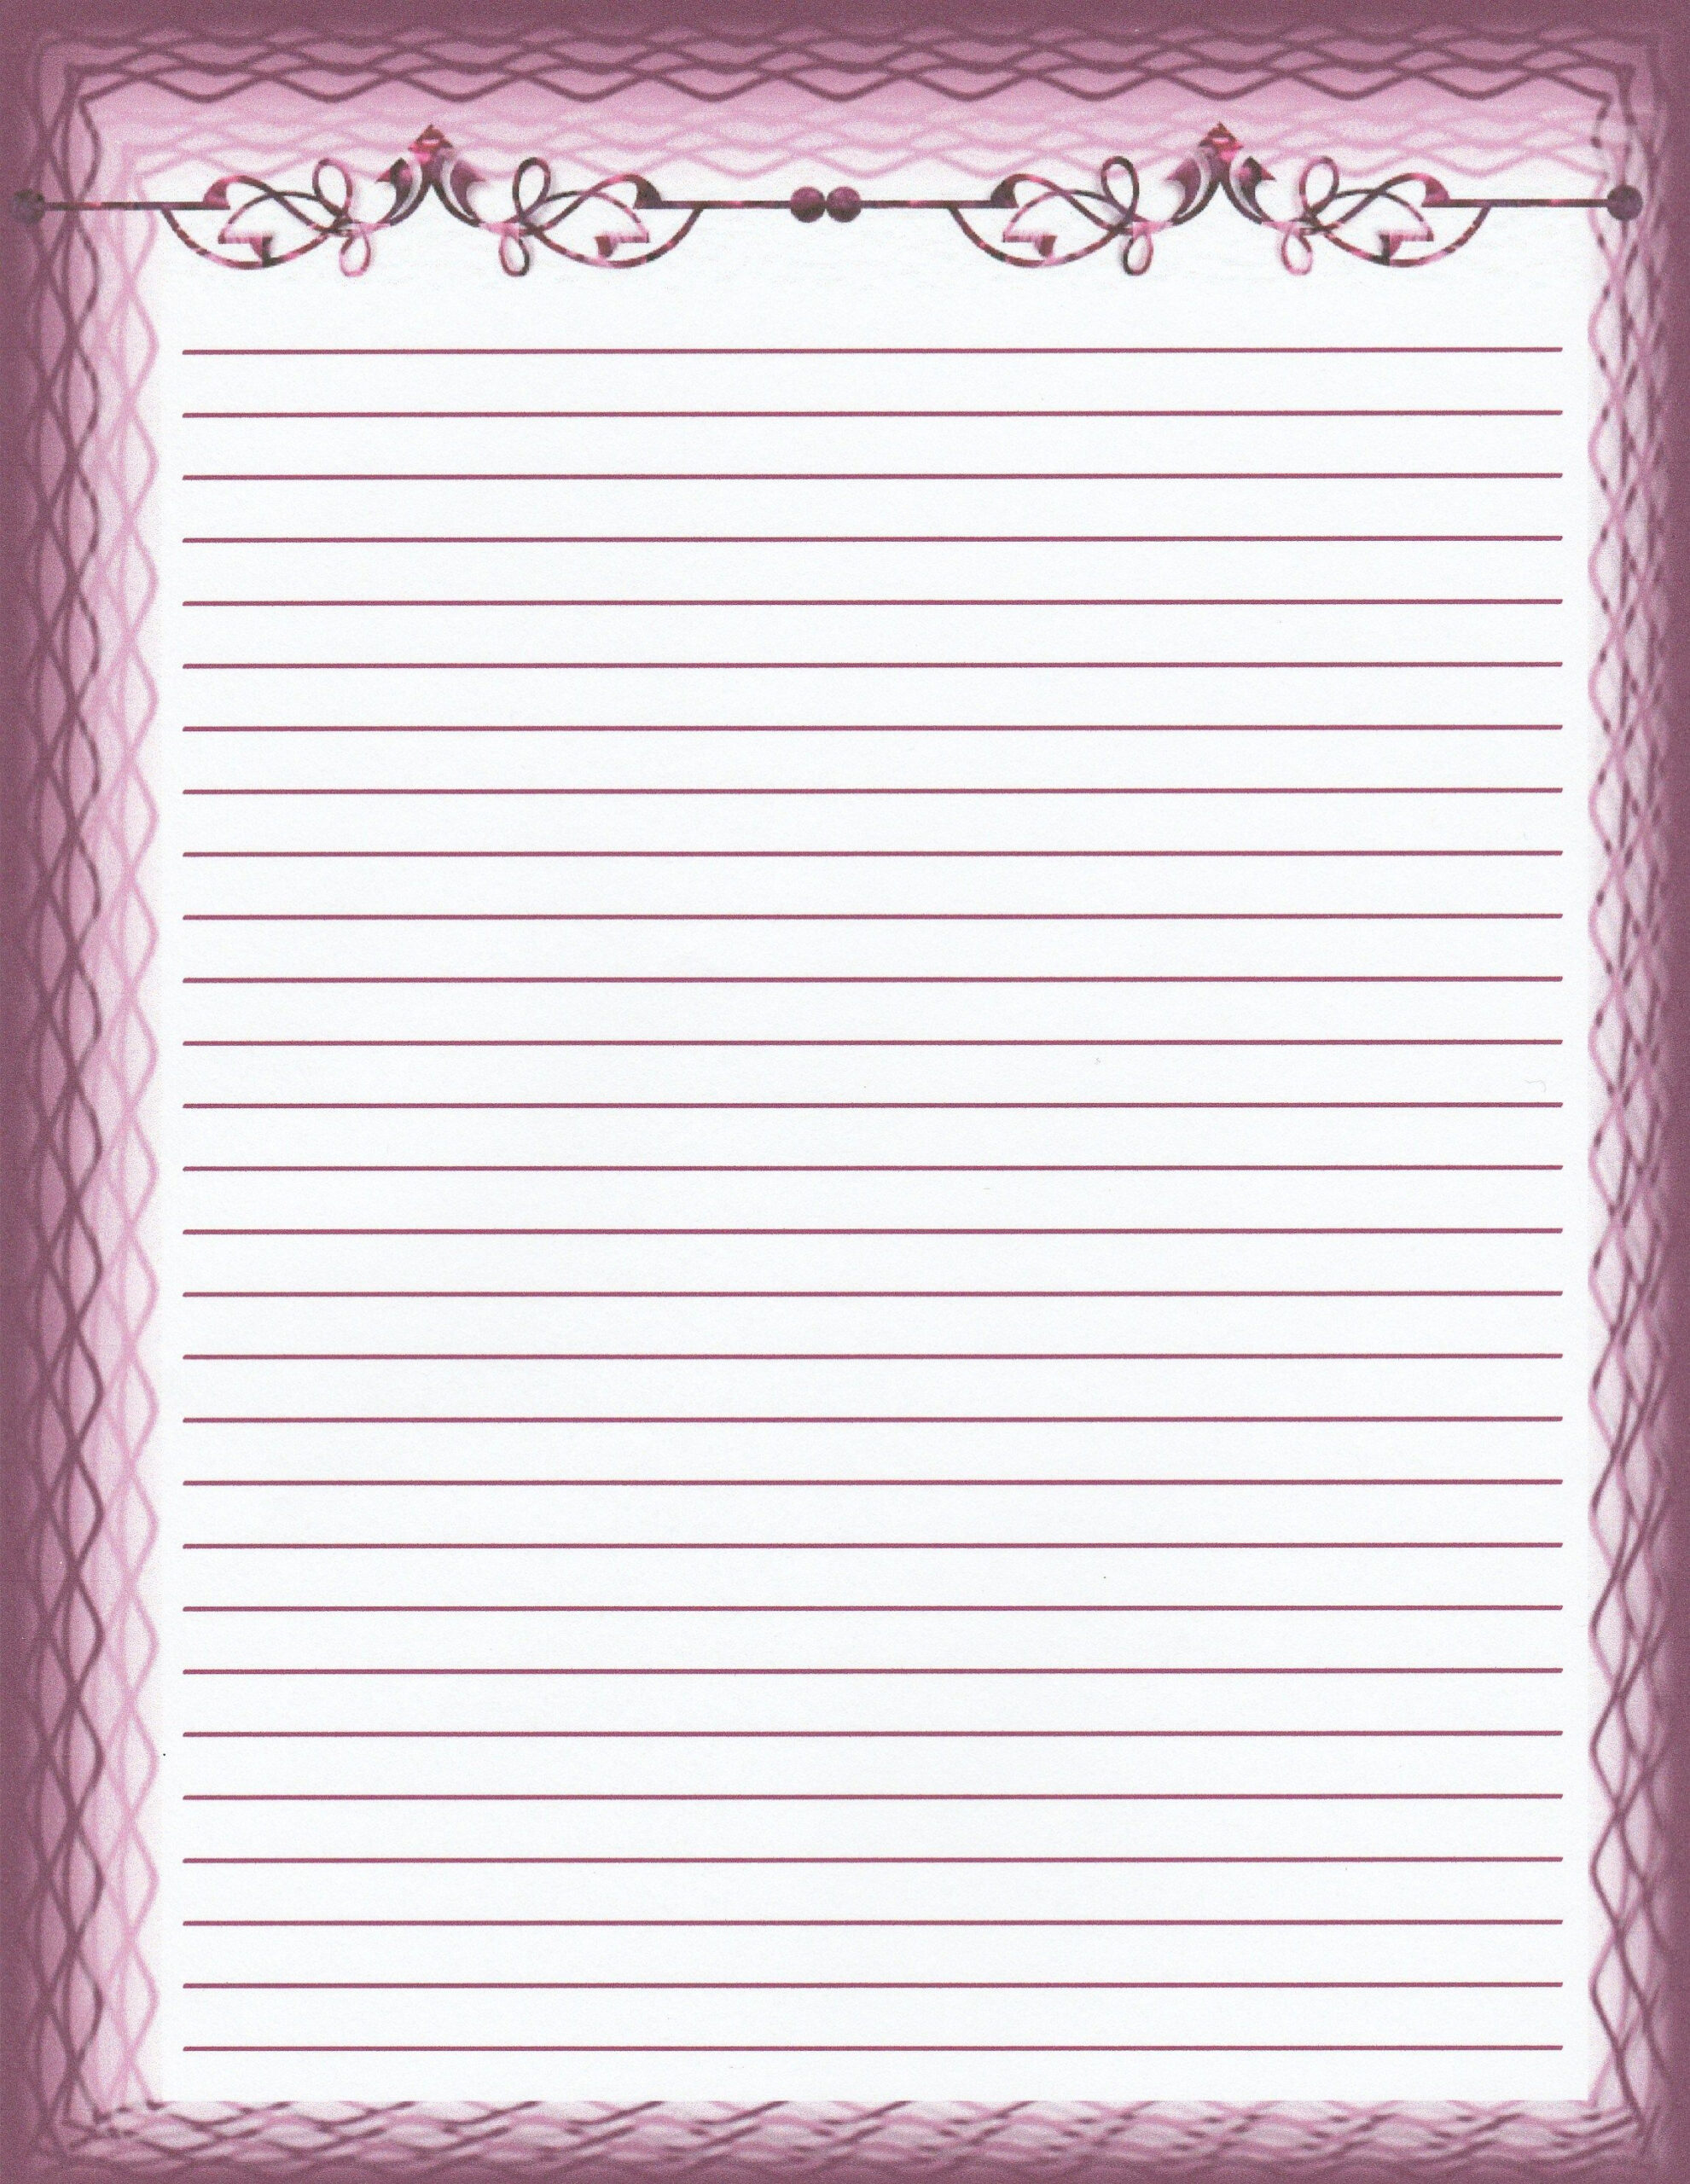 Printable Lined Stationery Paper Purple